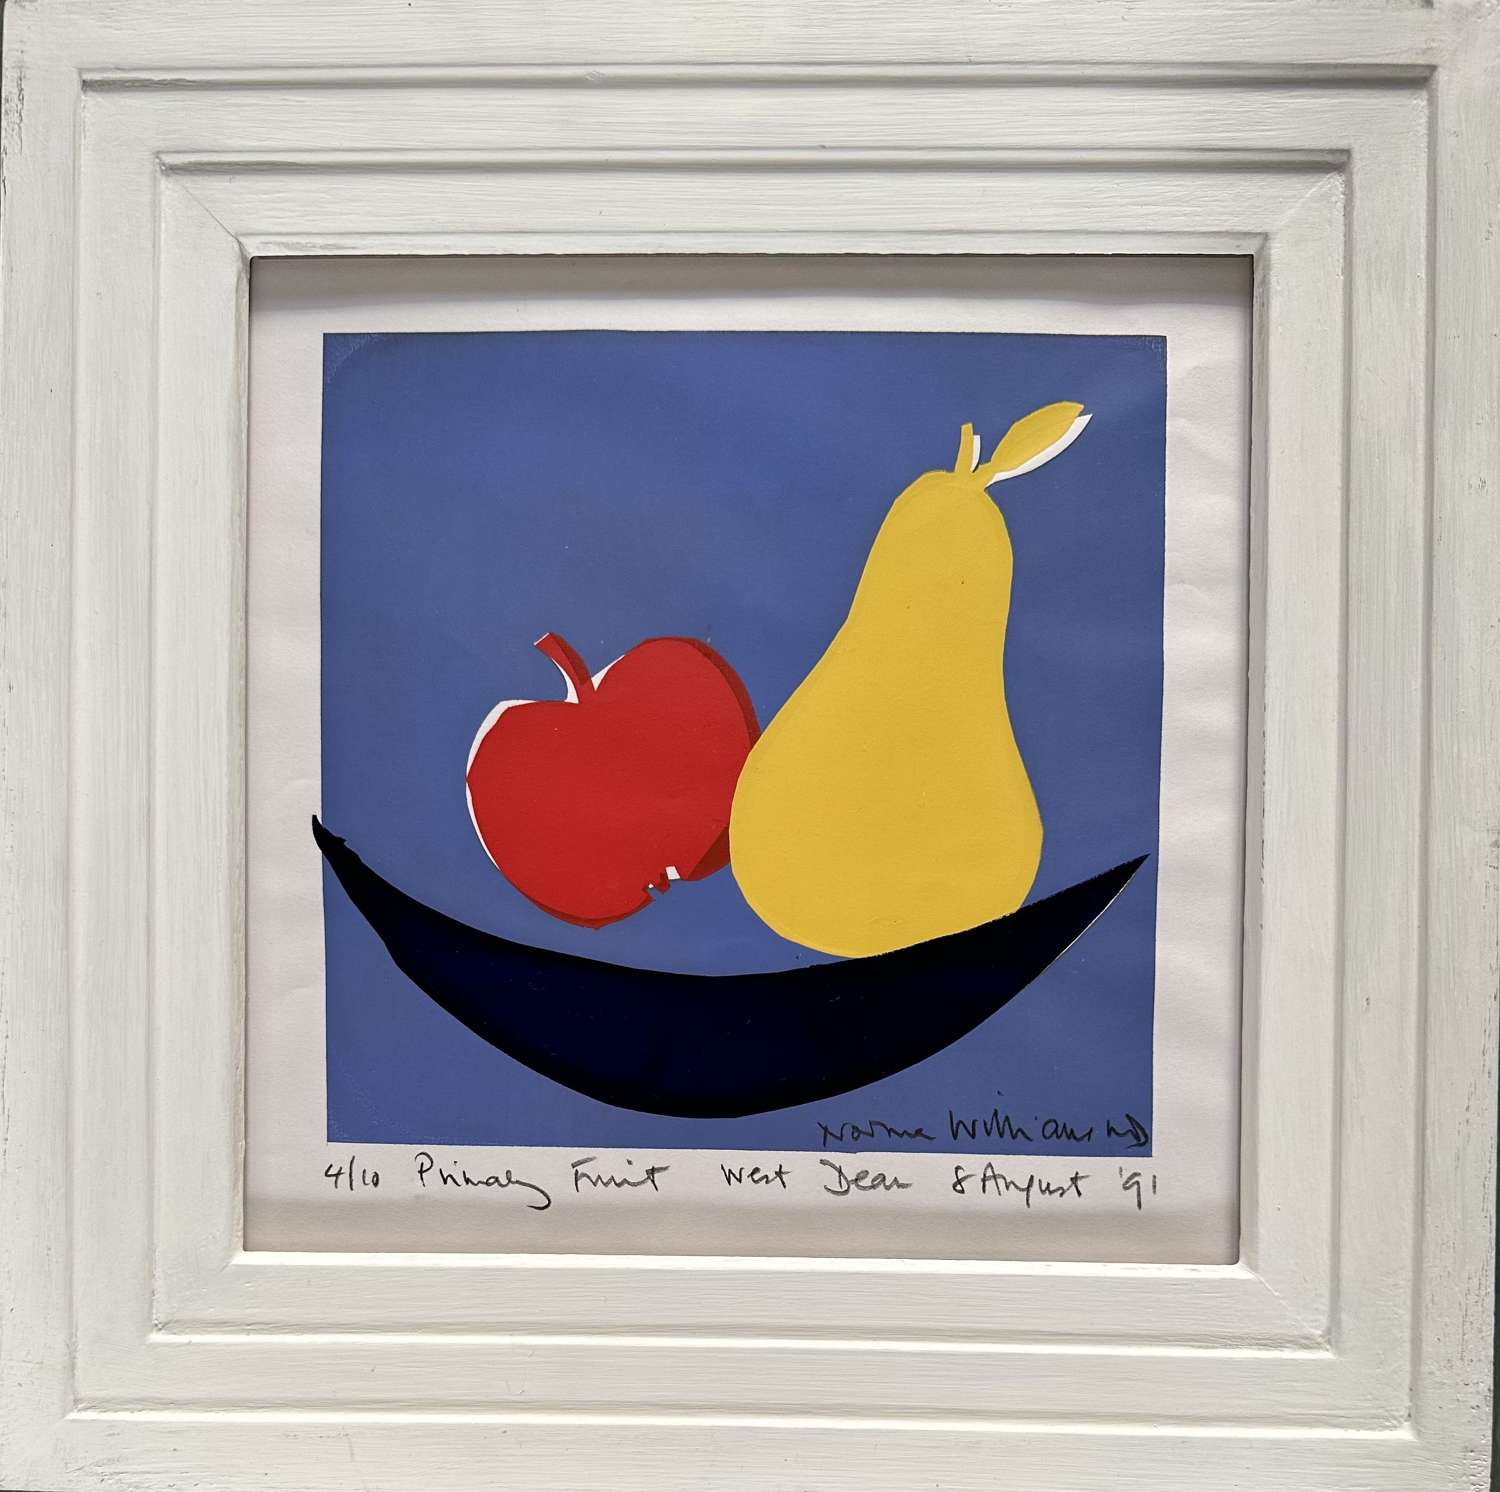 Bowl of Fruit - Norma Williams